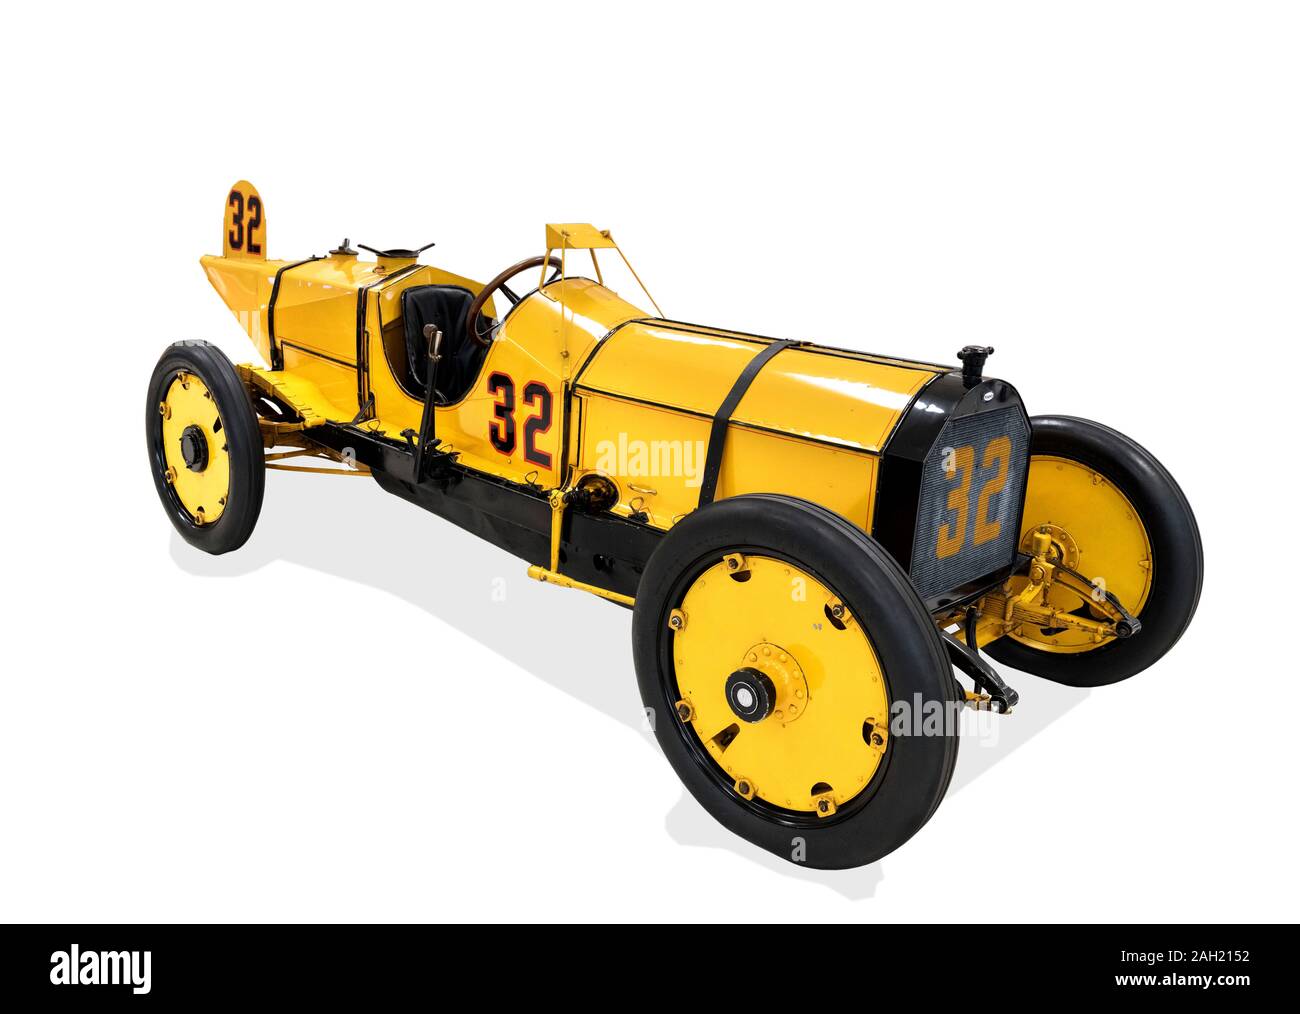 The Marmon 'Wasp' which won the inaugural 1911 Indianapolis 500 in 1911, Indianapolis Motor Speedway Museum, Indianapolis, Indiana, USA. Stock Photo